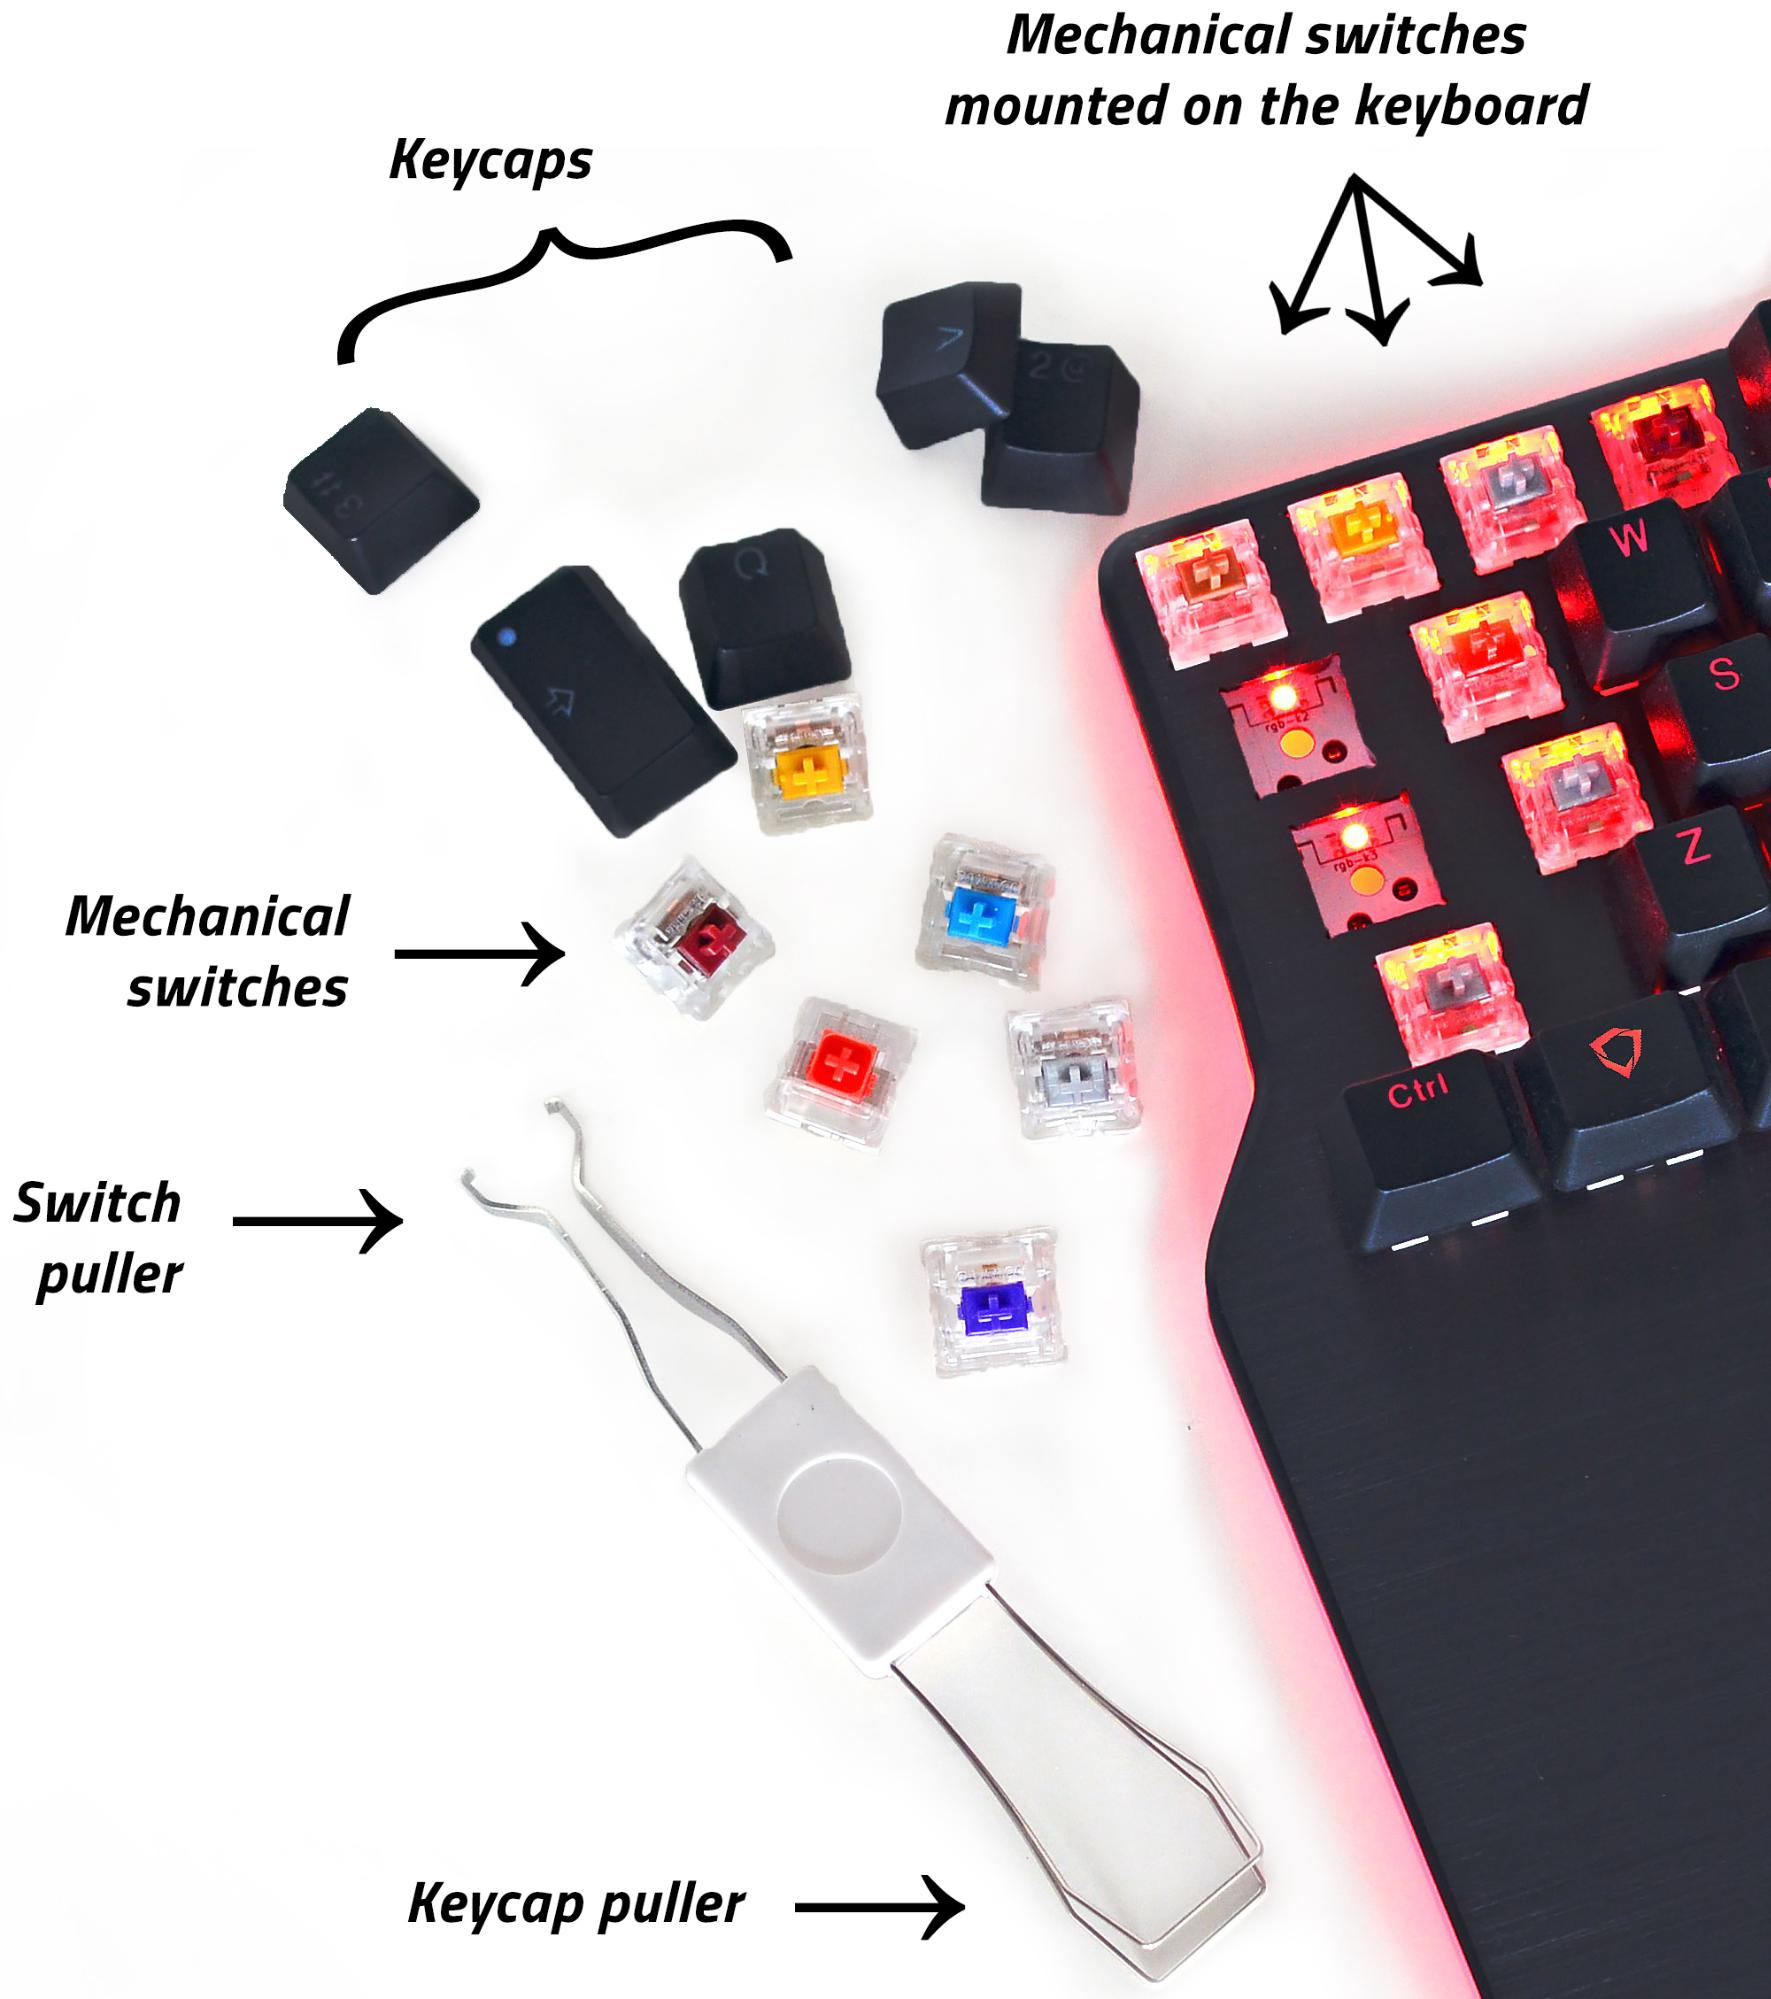 keyboard switches